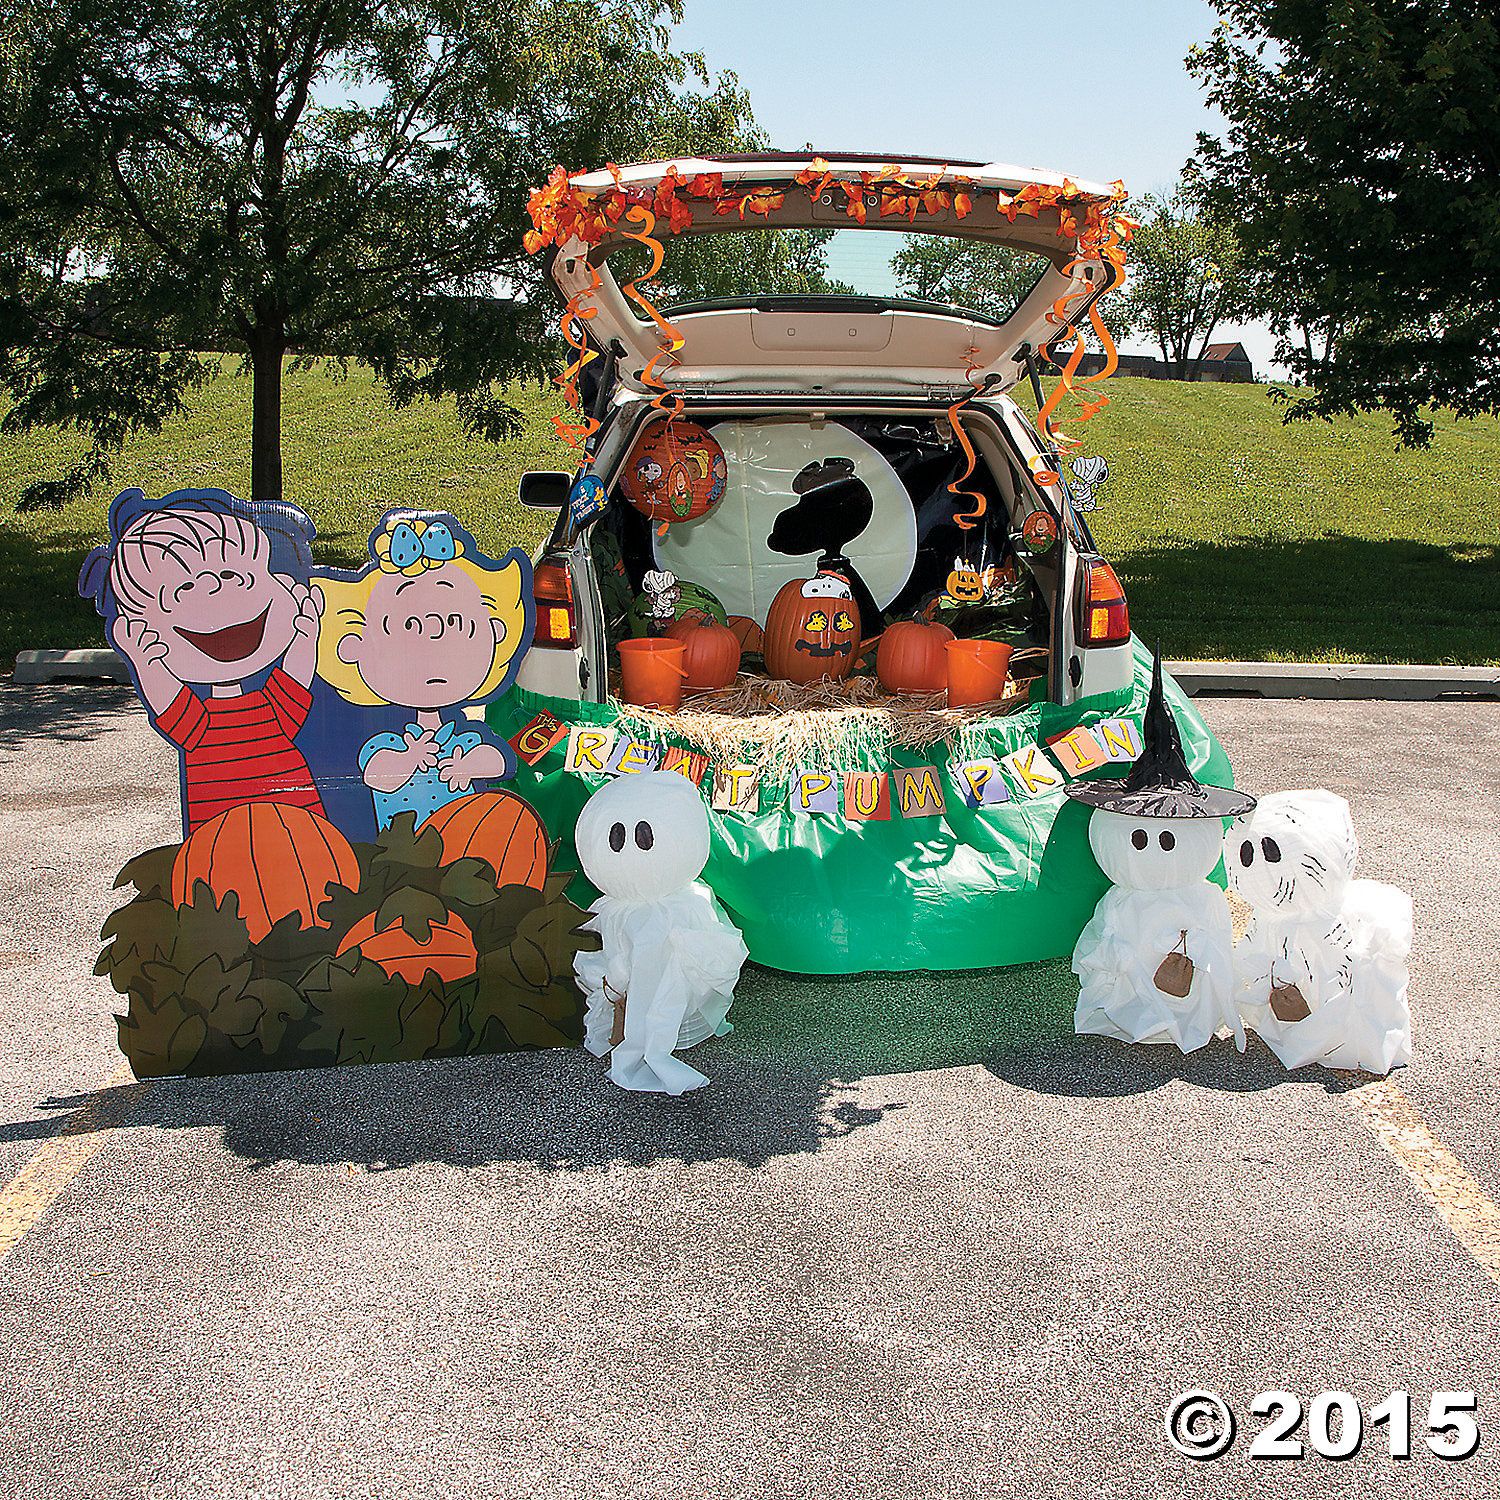 35 Easy TrunkorTreat Ideas 2022 TrunkorTreat Themes Decor lupon